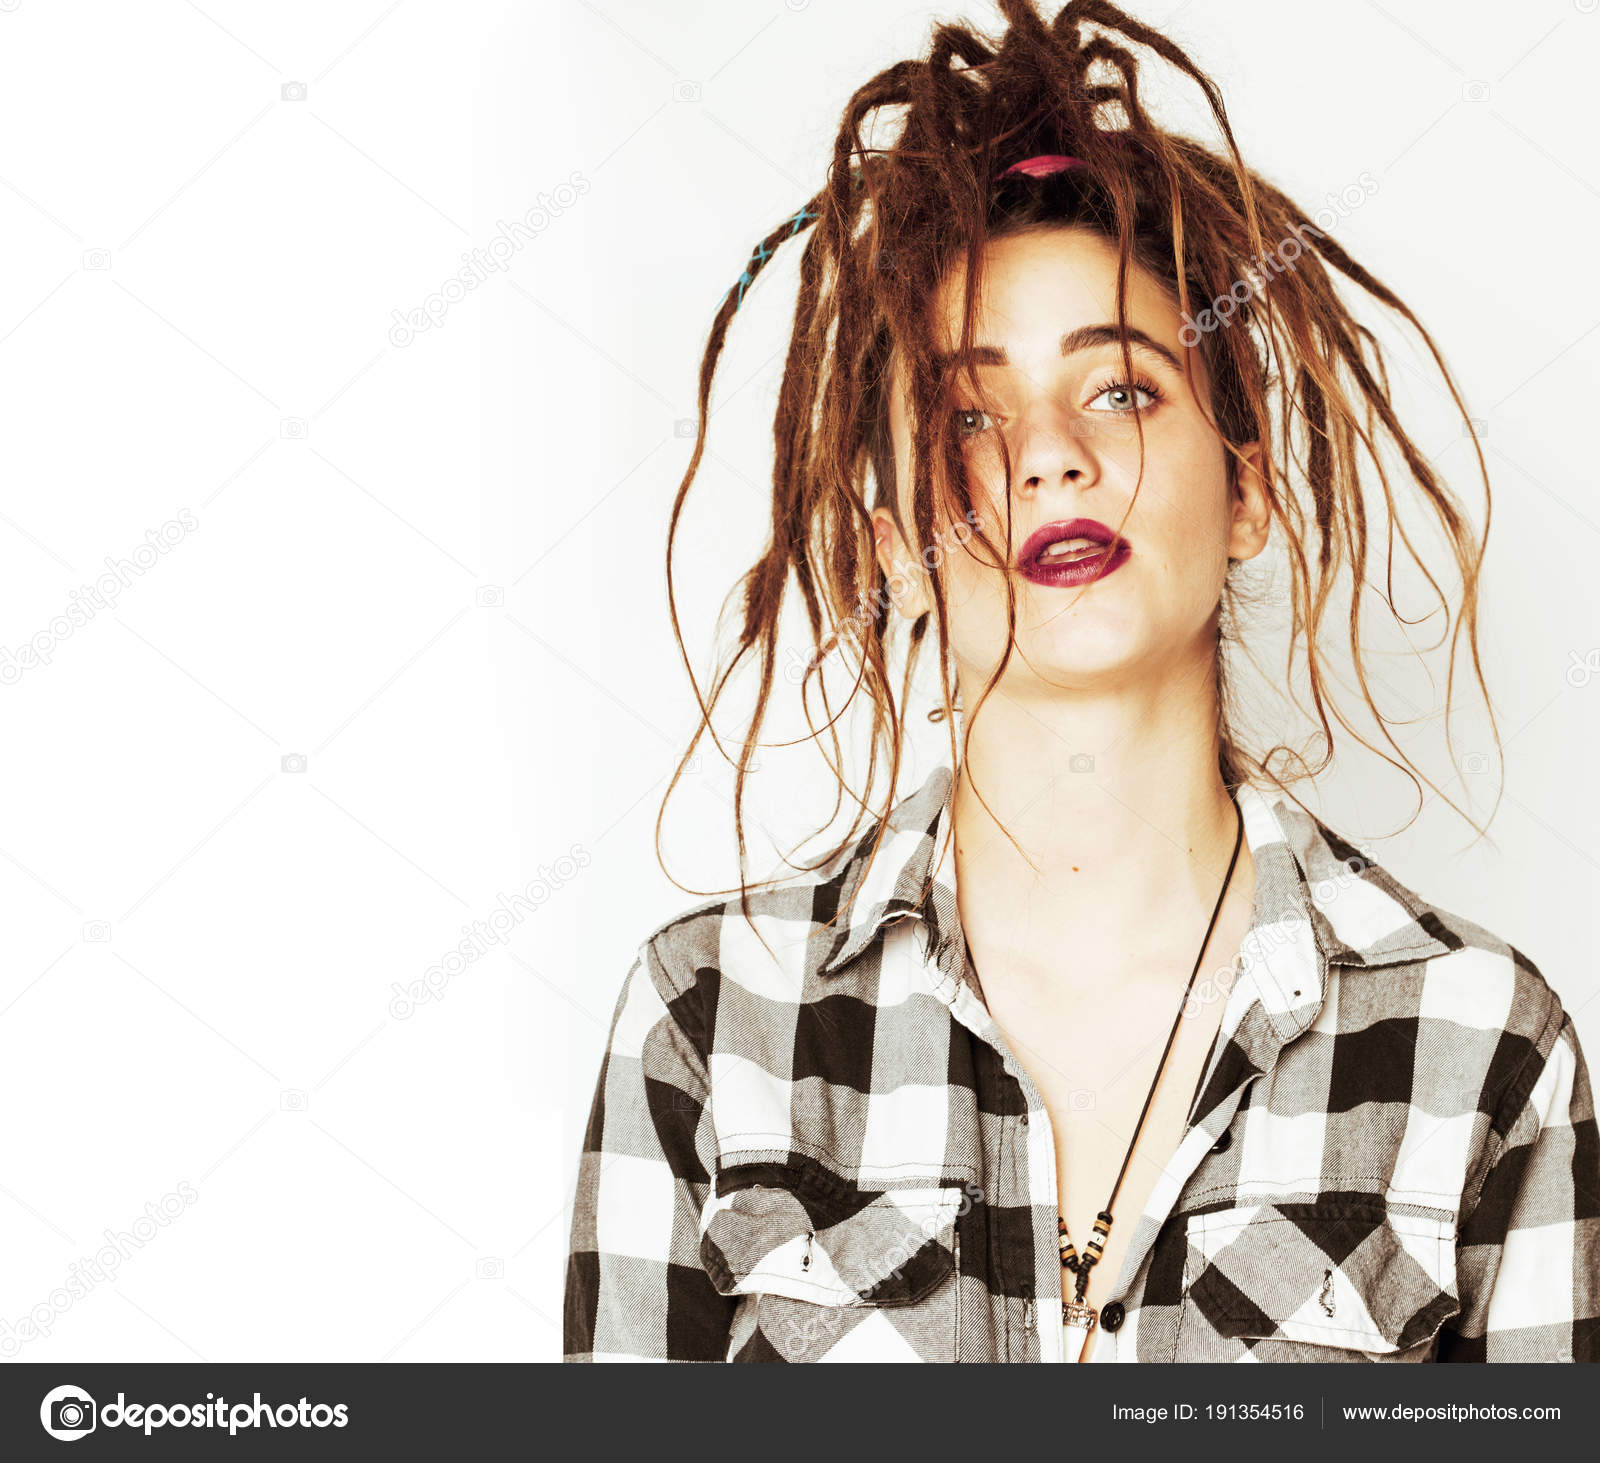 Real Caucasian Woman With Dreadlocks Hairstyle Funny